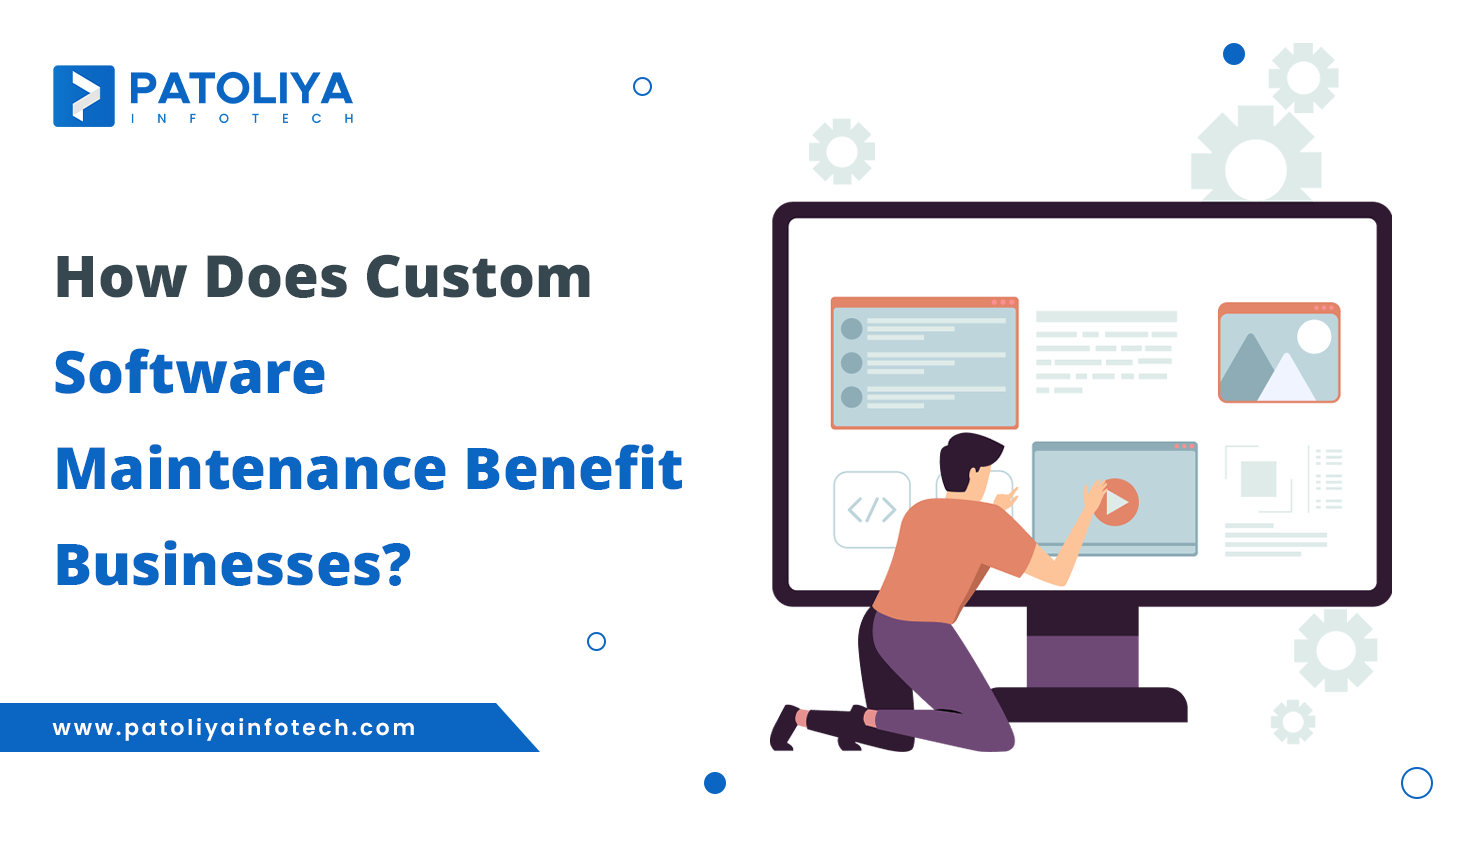 How Does Custom Software Maintenance Benefit Businesses?